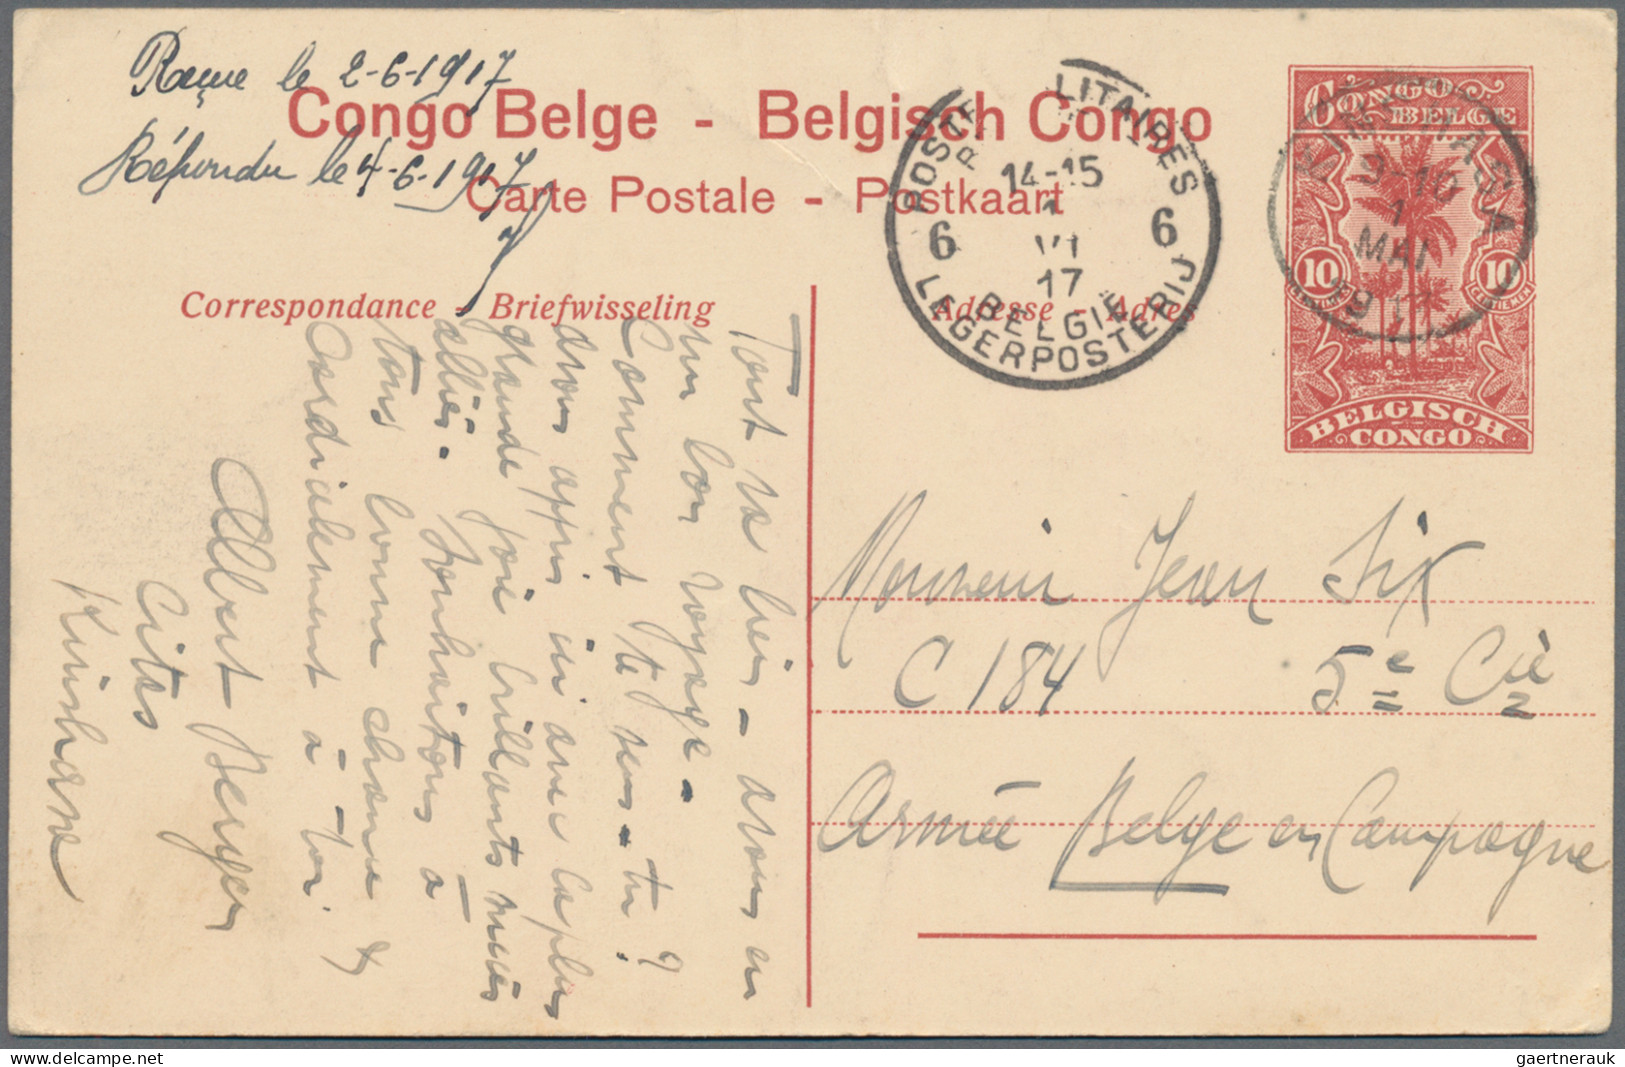 Belgian Congo  - postal stationery: 1900/17, four stationery cards all used to B